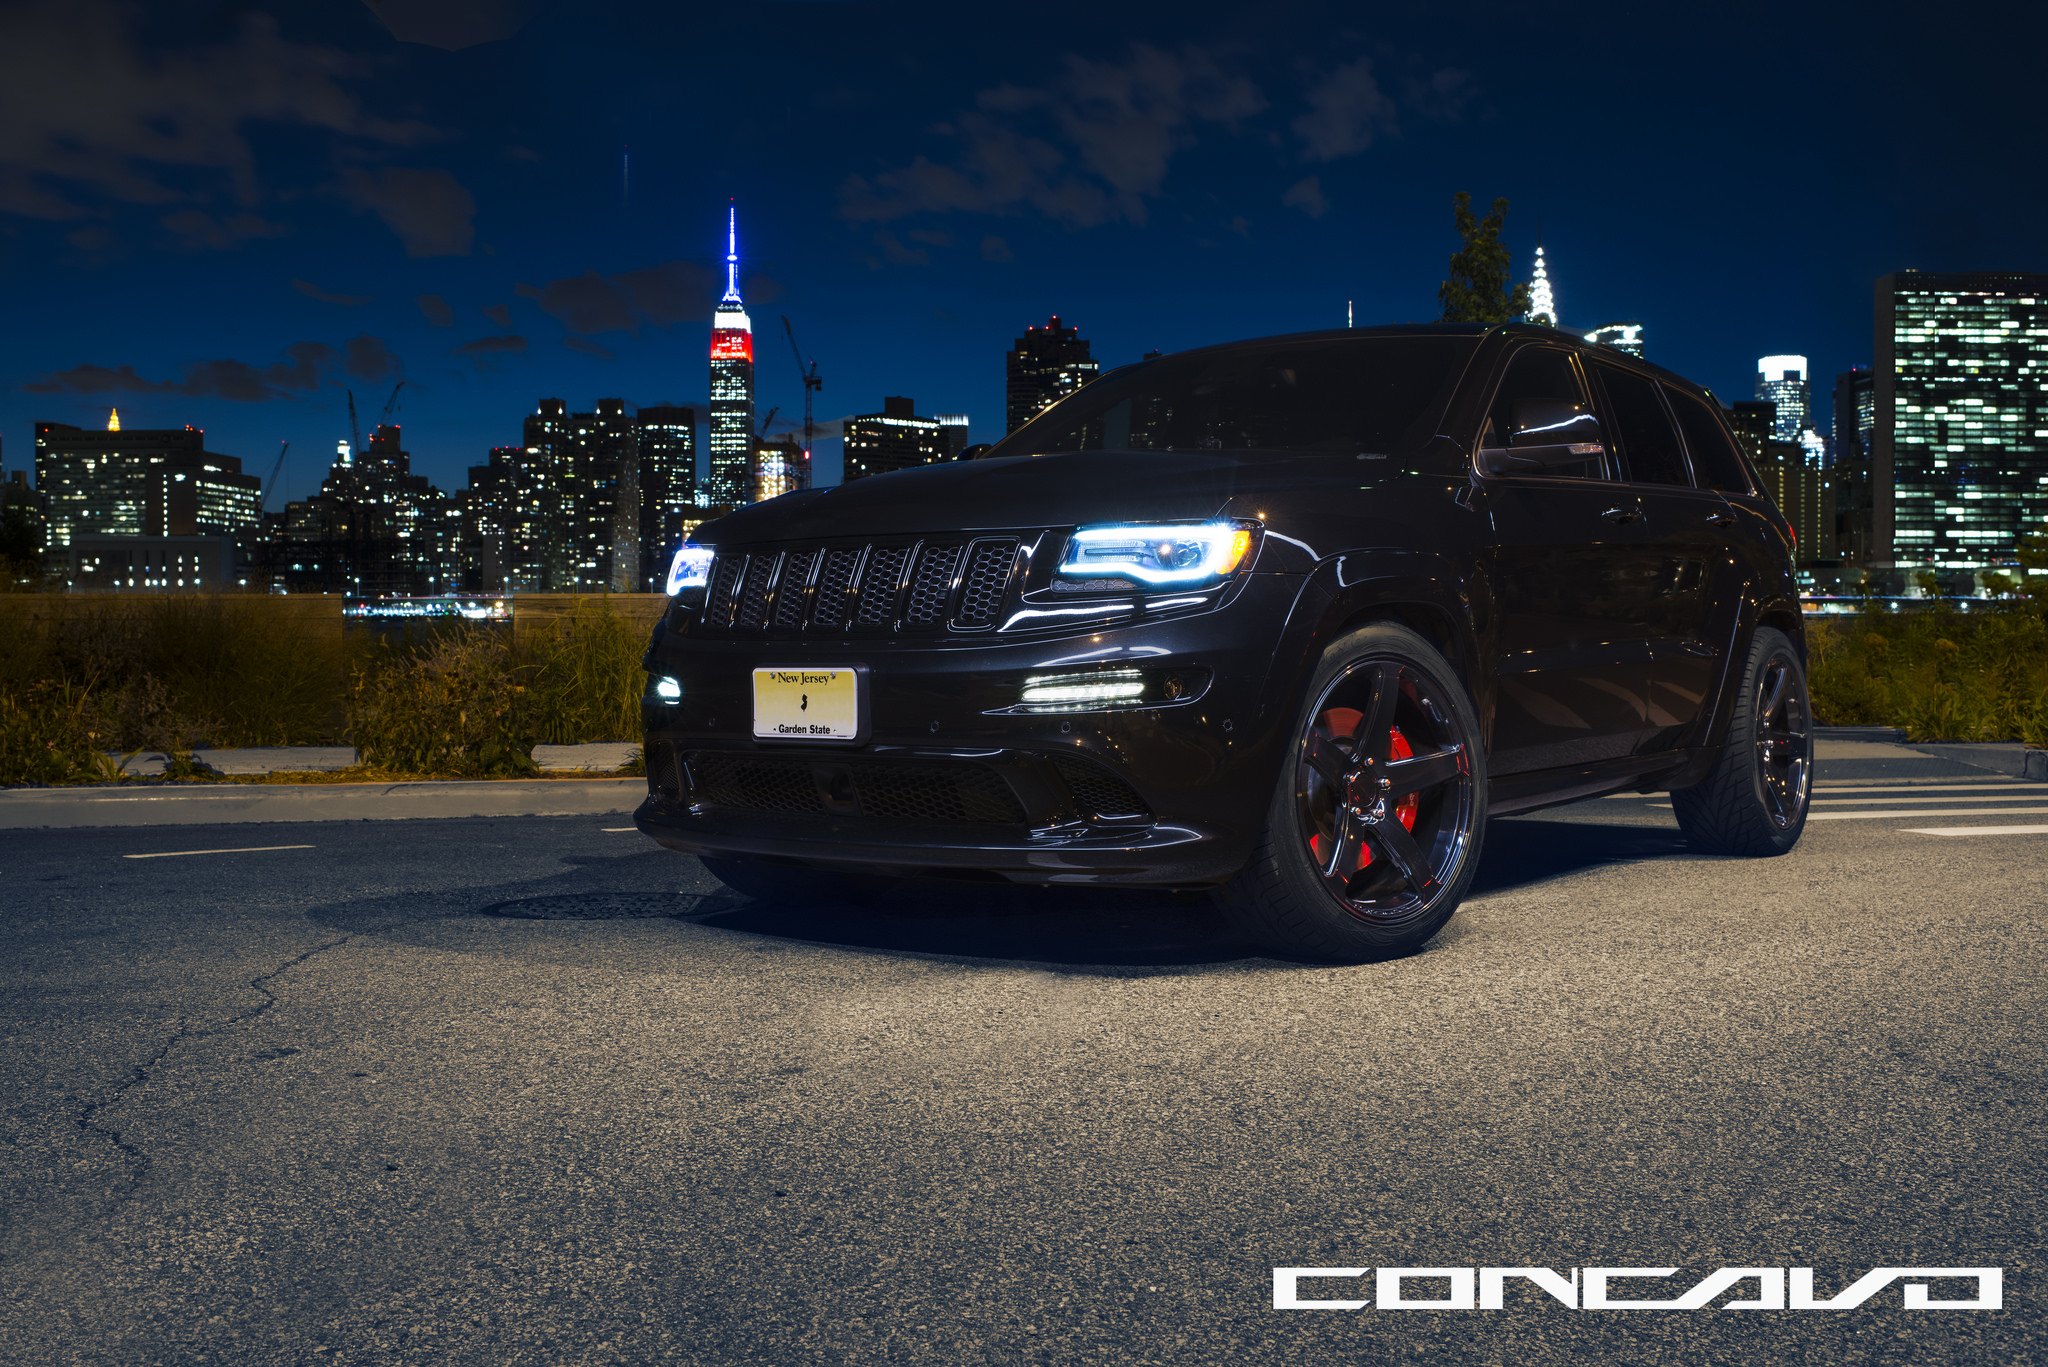 Midnight Rumbler Jeep Grand Cherokee SRT - Photo by Concavo